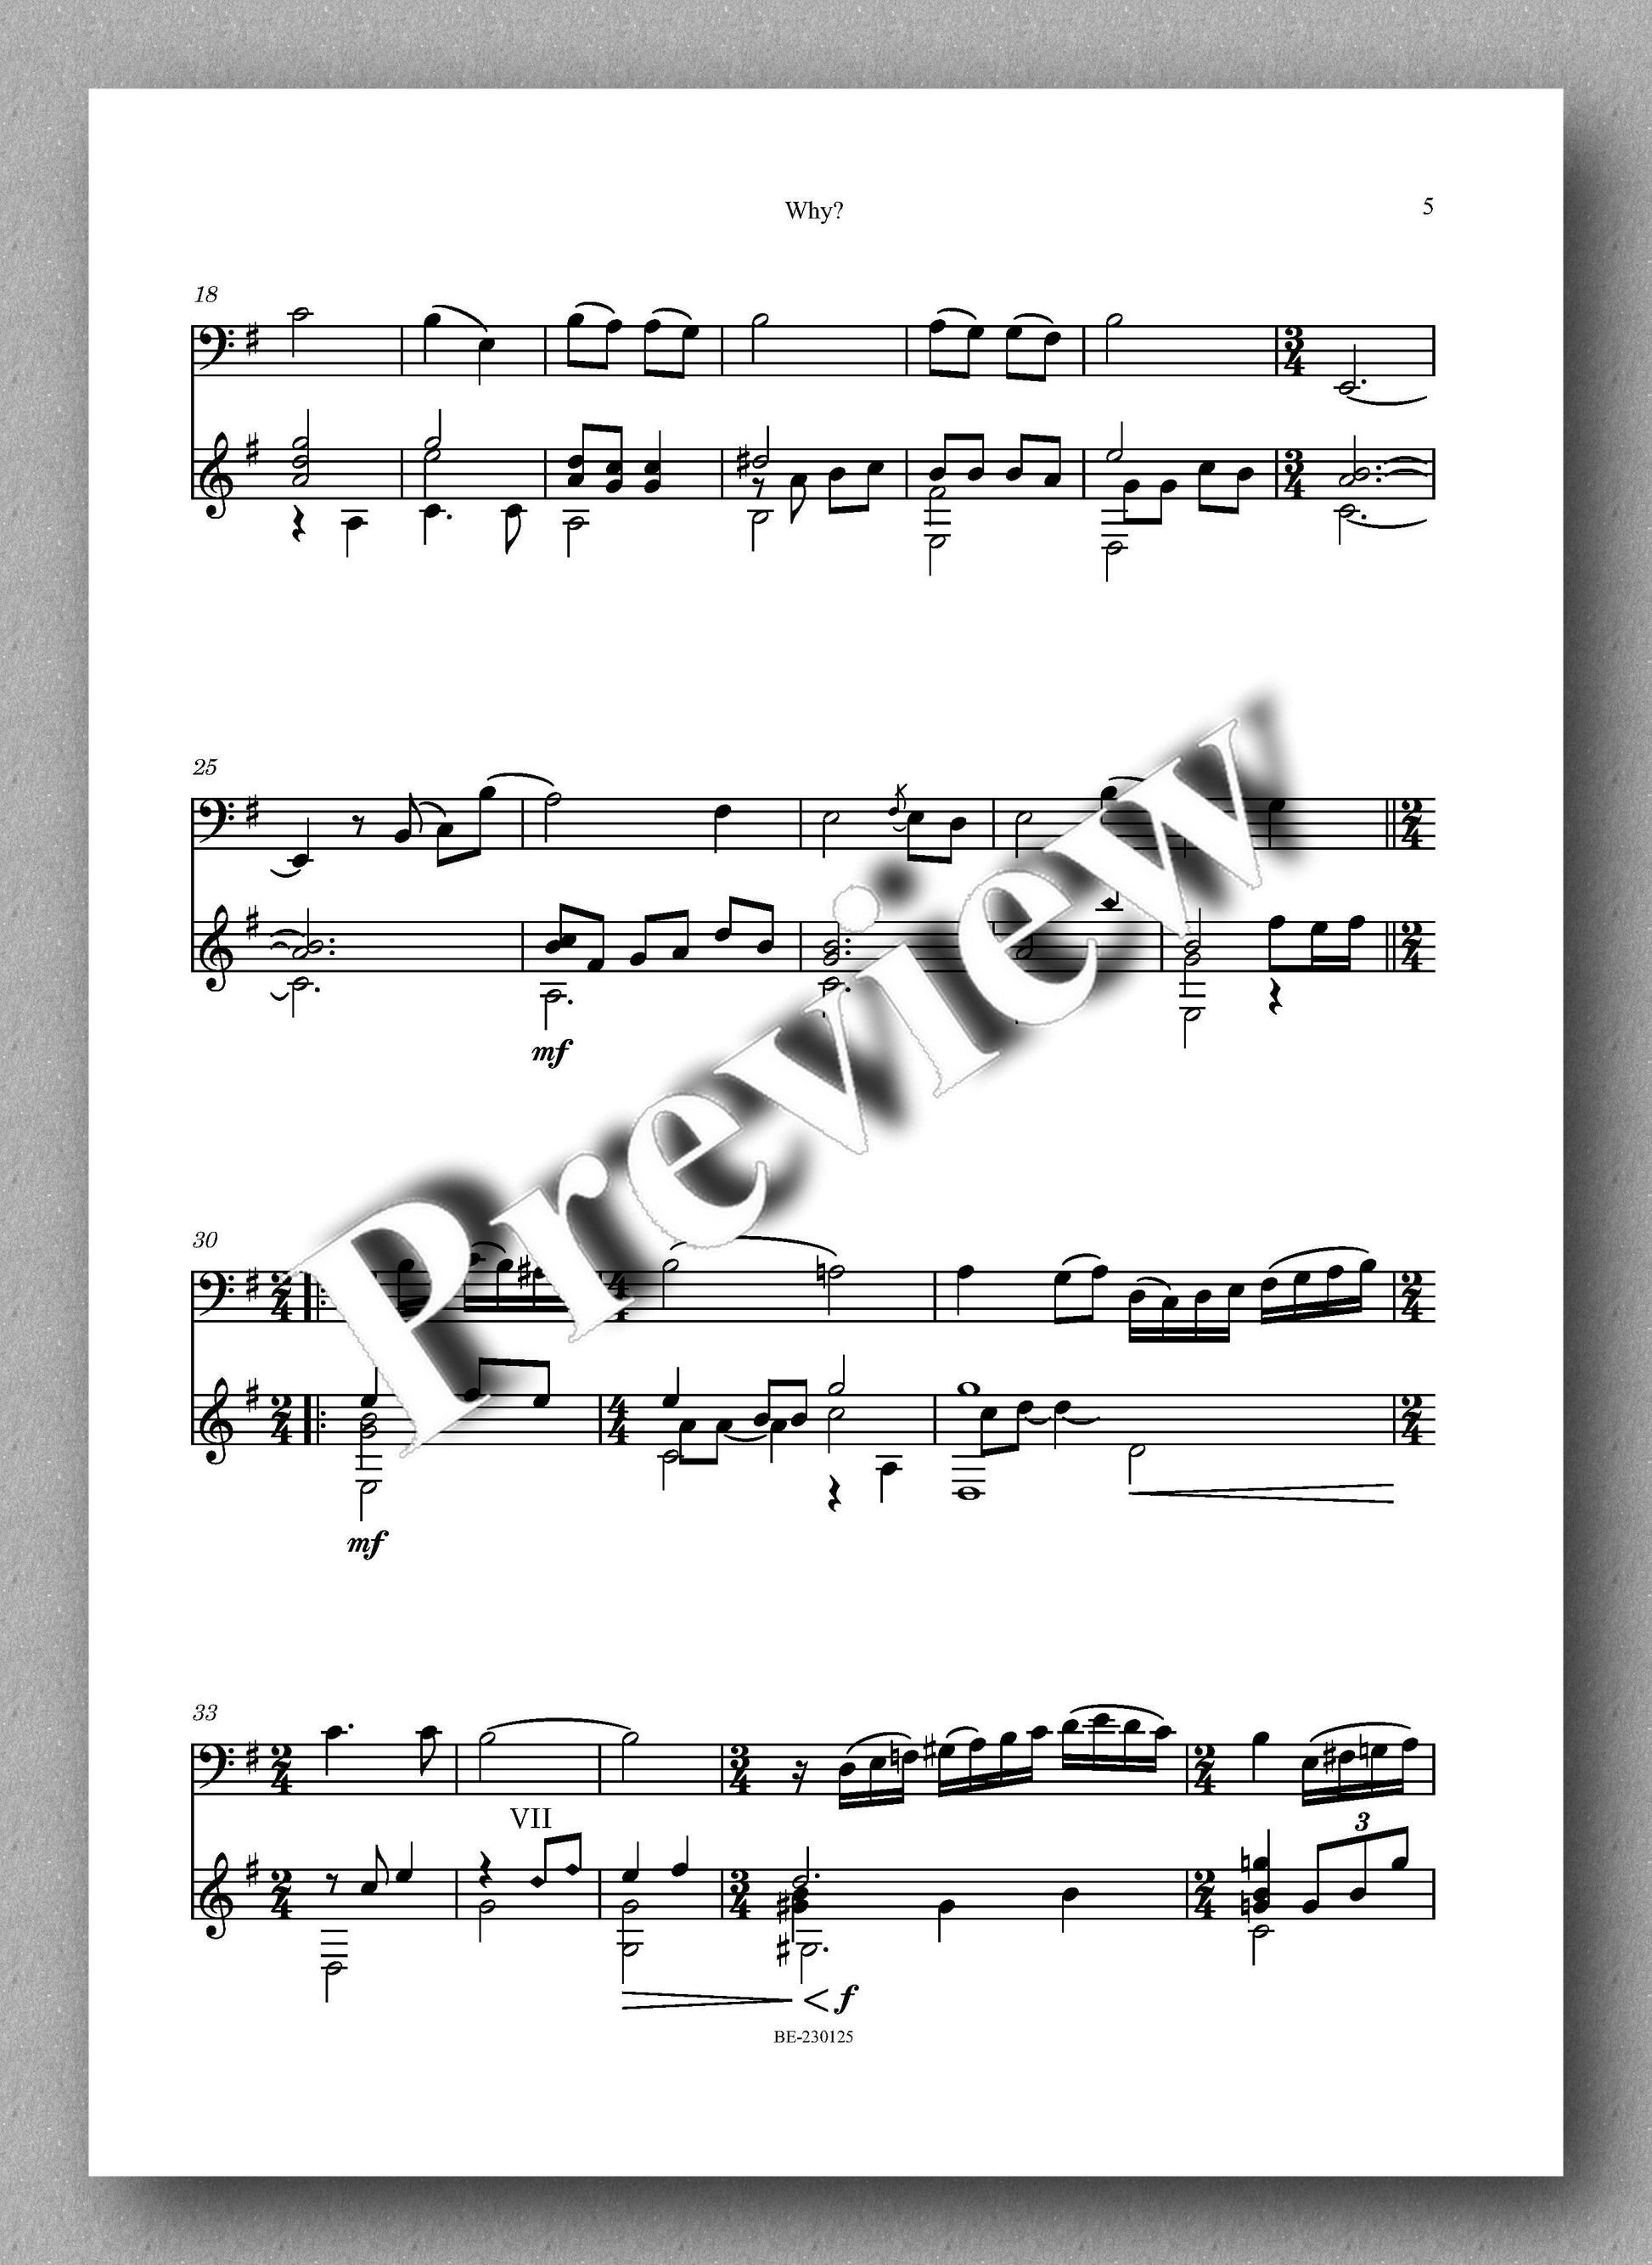 Erena, Why? (cello and guitar) - preview of the music score 2